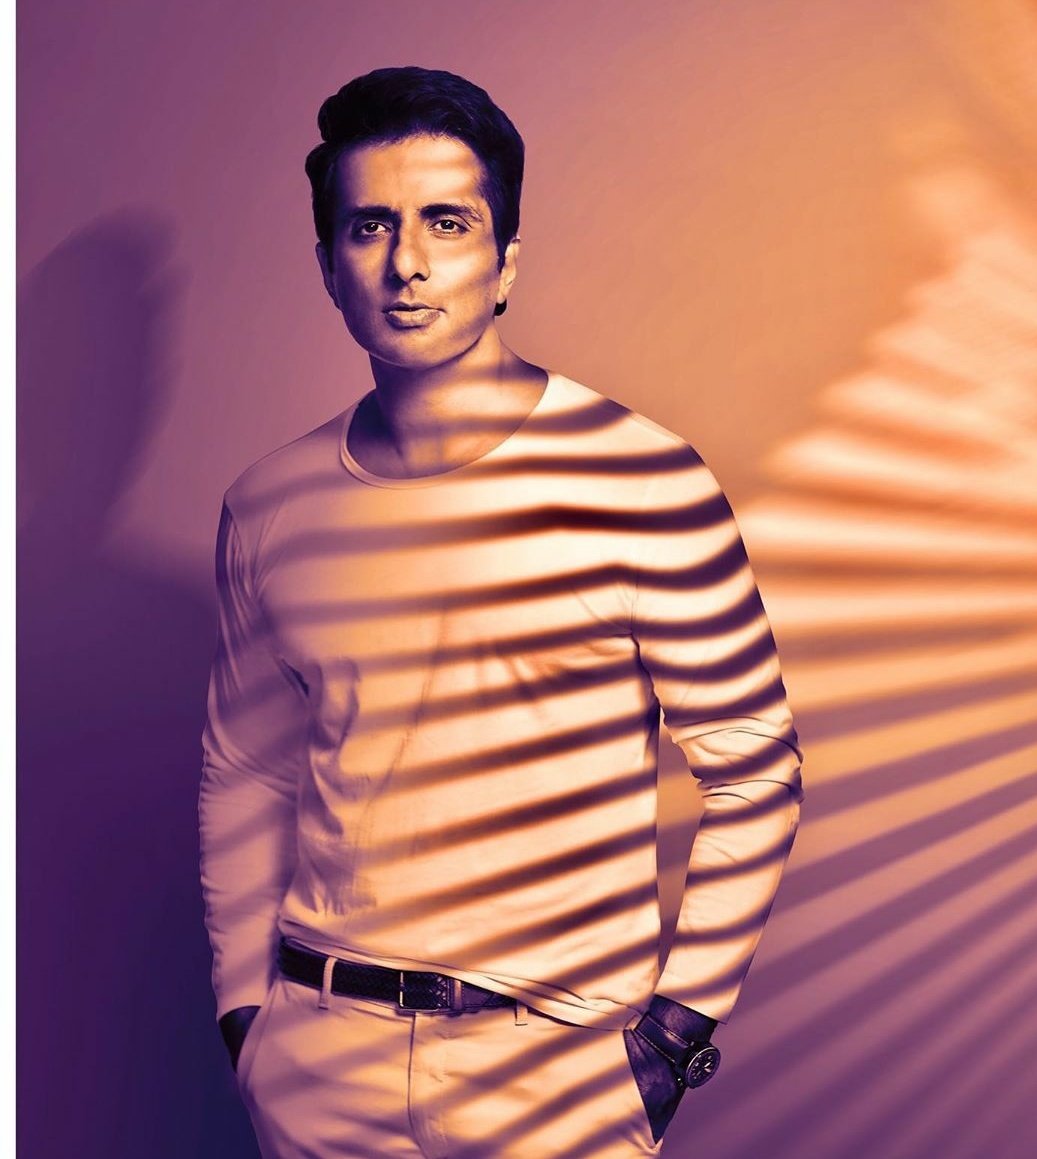 Wishing uh 'the real-life hero' @SonuSood 
To have the happiest life and may ur humanity protect u always ❤️❤️
 love you 3k sir 🙏🙏🙏🙏 #HBDRealHeroSonuSood 
#SoonuSood 
#Soonusoodrealhero